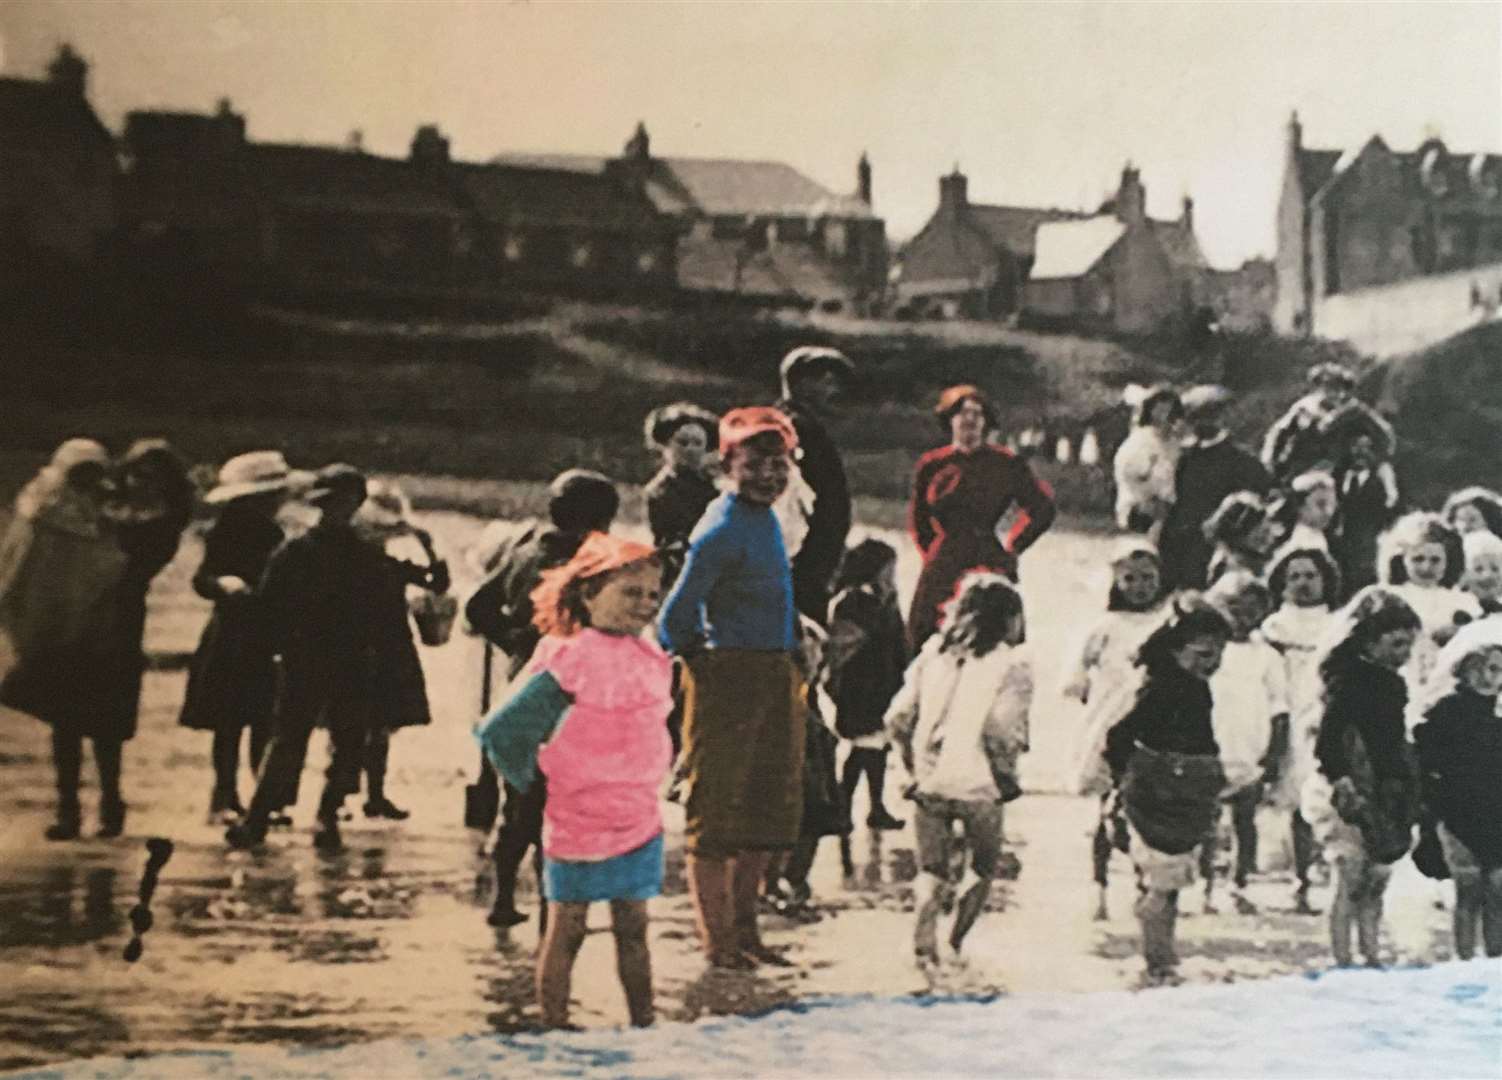 The New Year Soakin' promotional poster features artwork based on an archive photo of local bathers.